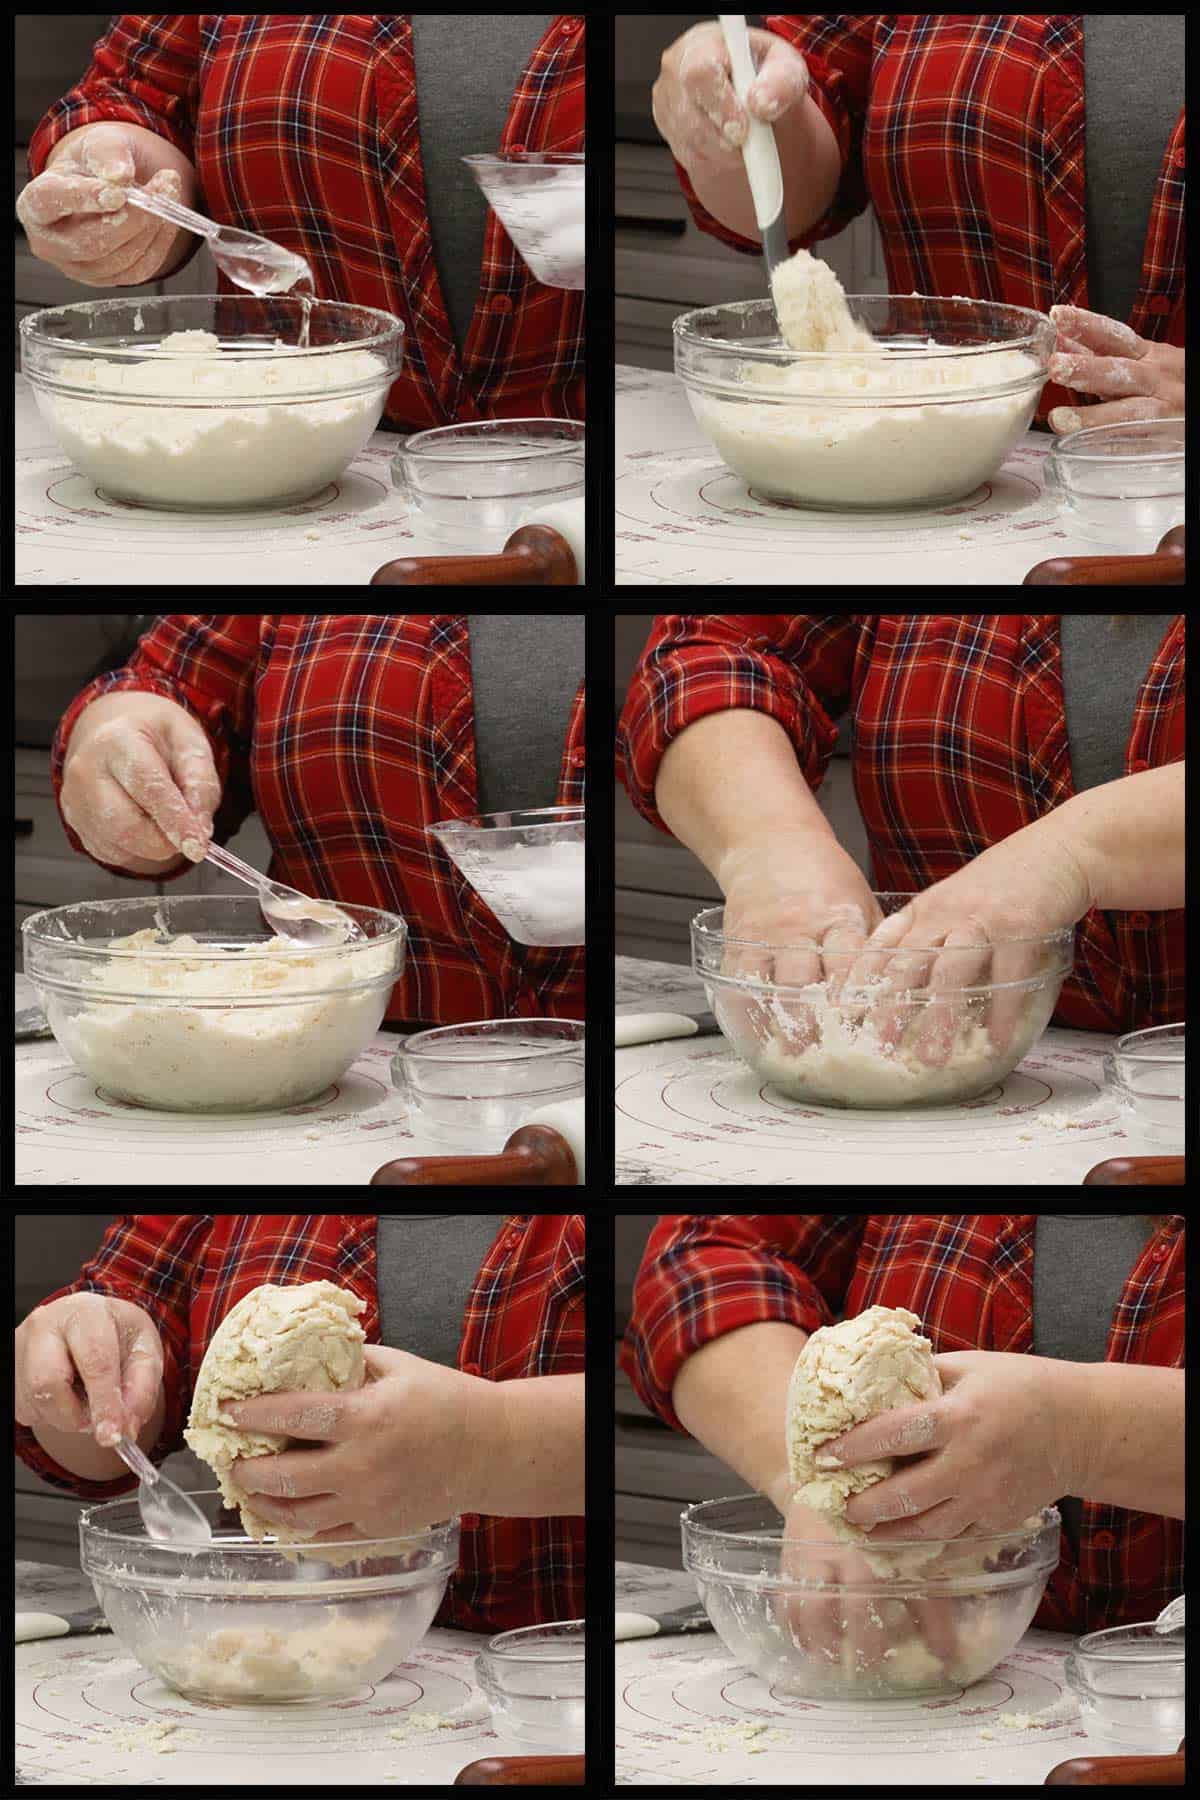 Hydrating the pastry dough with cold water and tossing with hands to combine.